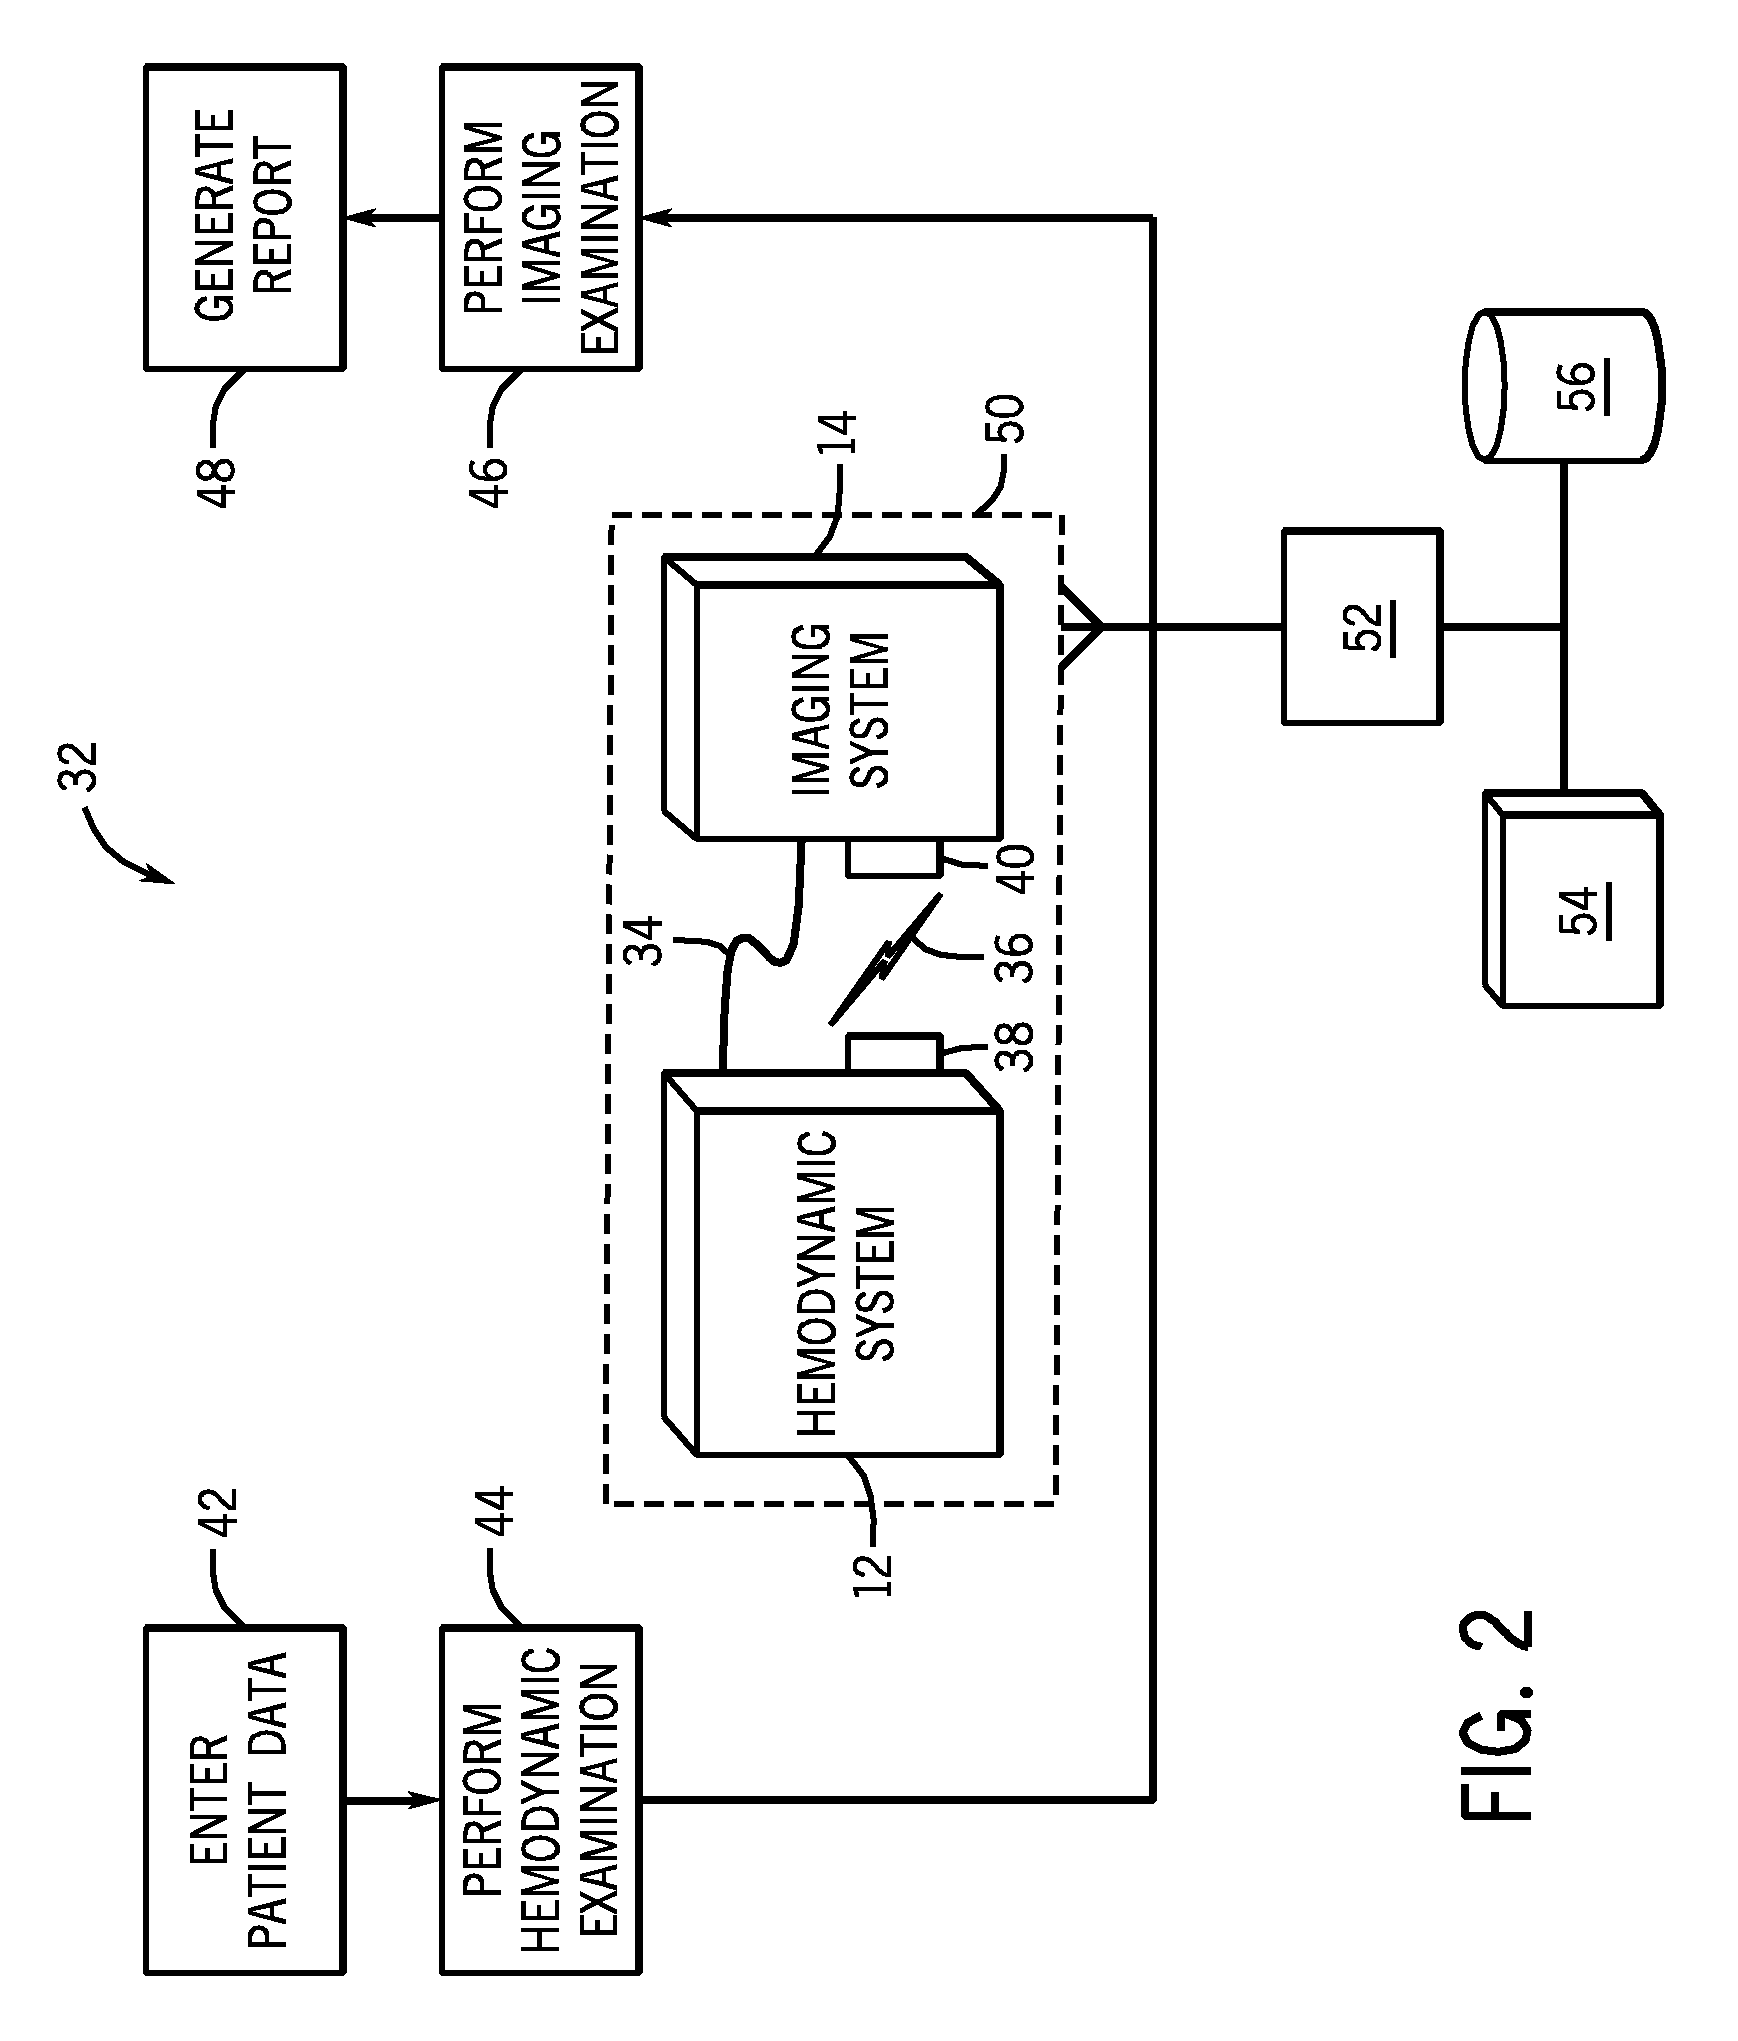 Systems and methods for integrating hemodynamic and imaging examinations